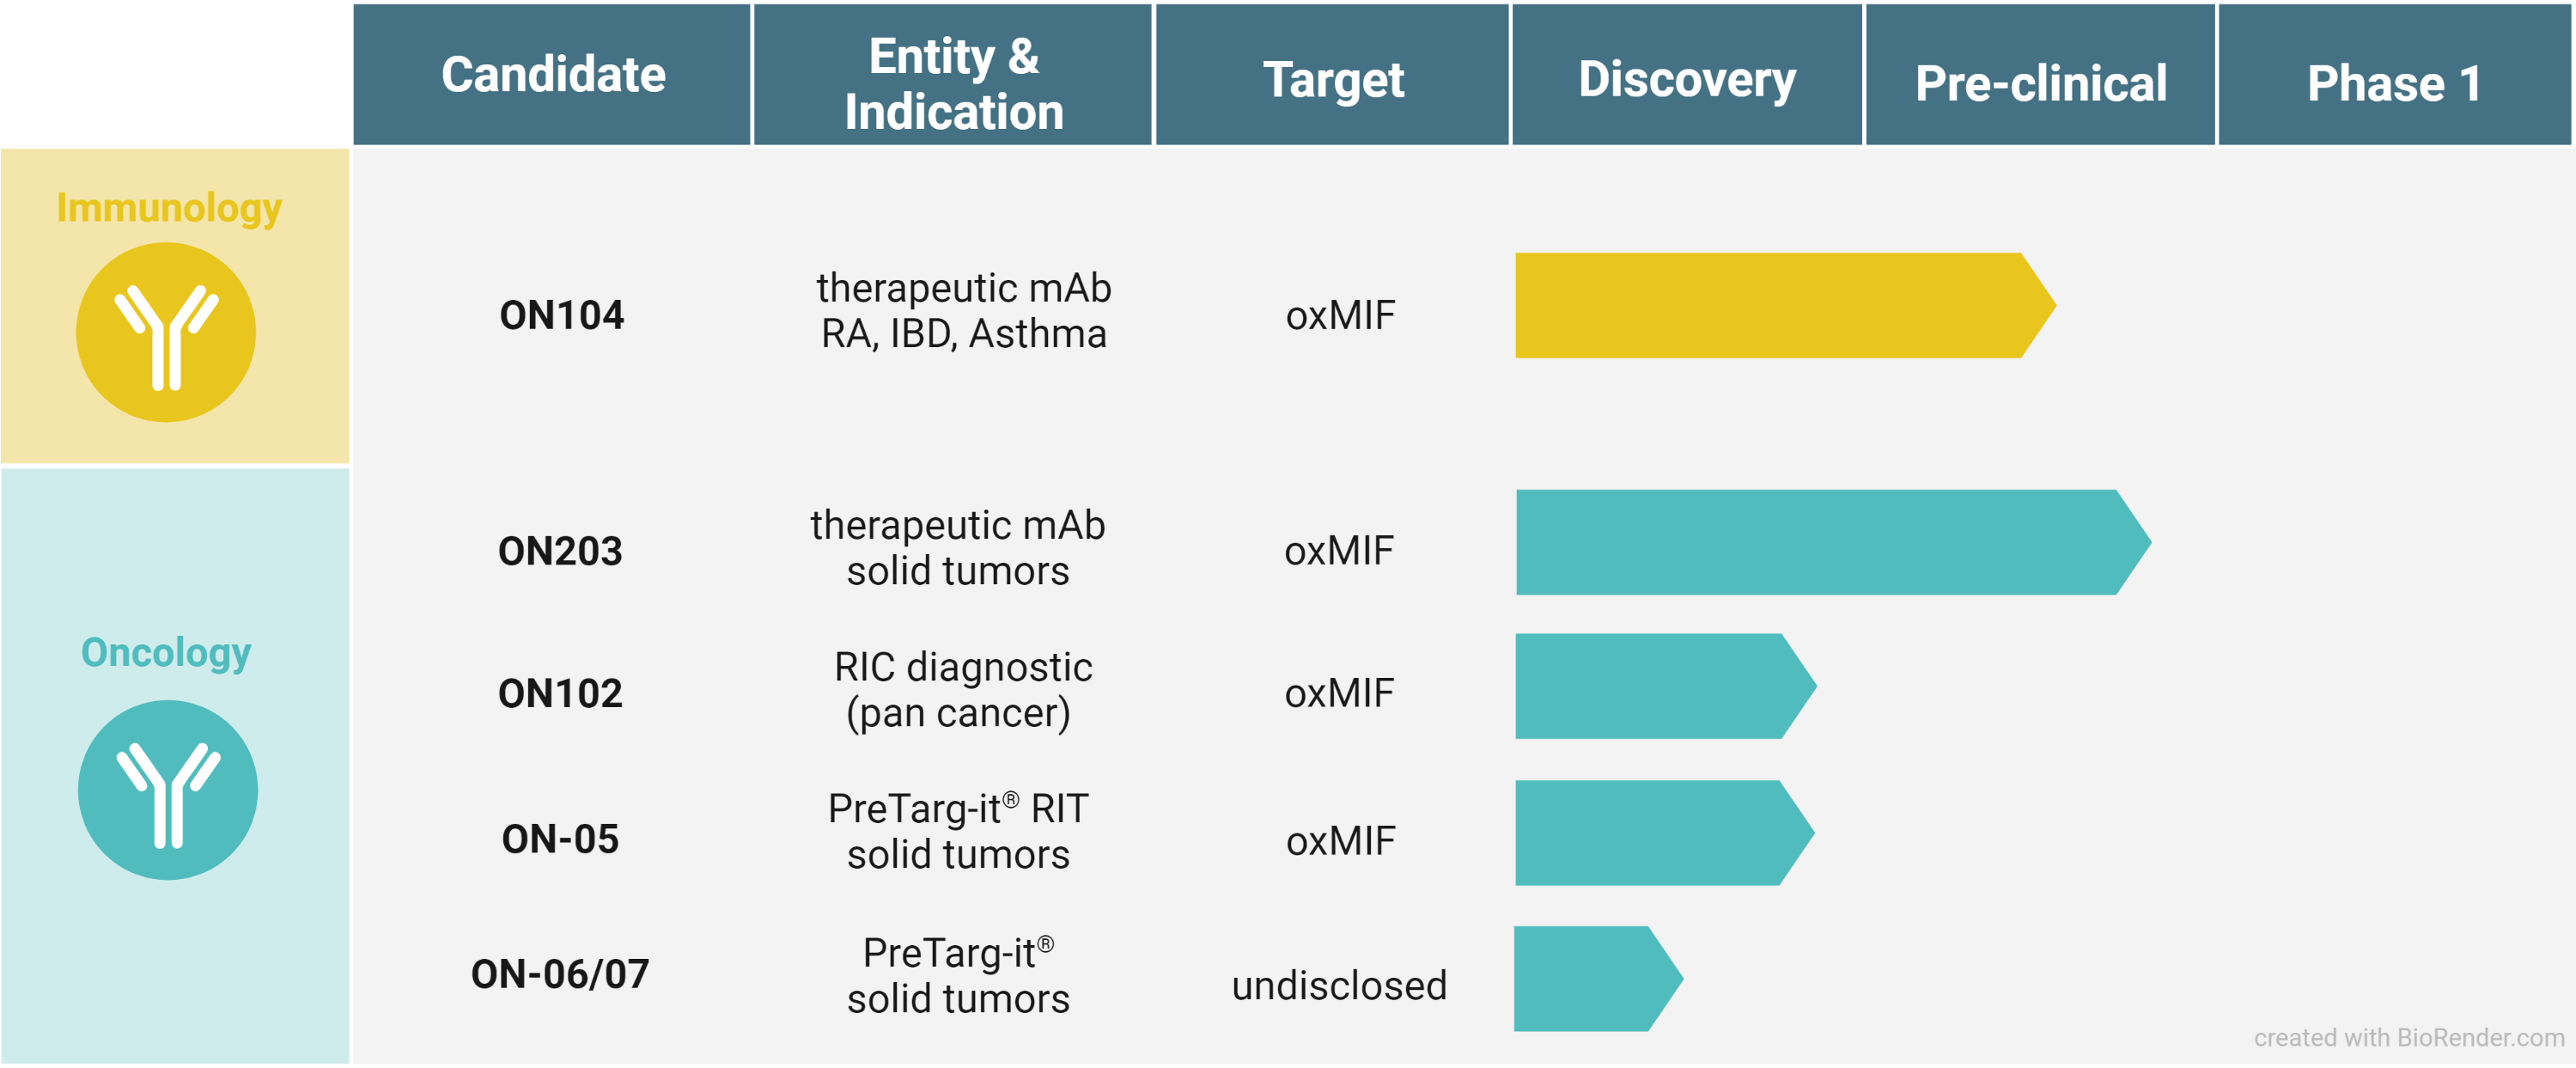 Our Pipeline: Therapeutic Antibodies targeting oxMIF